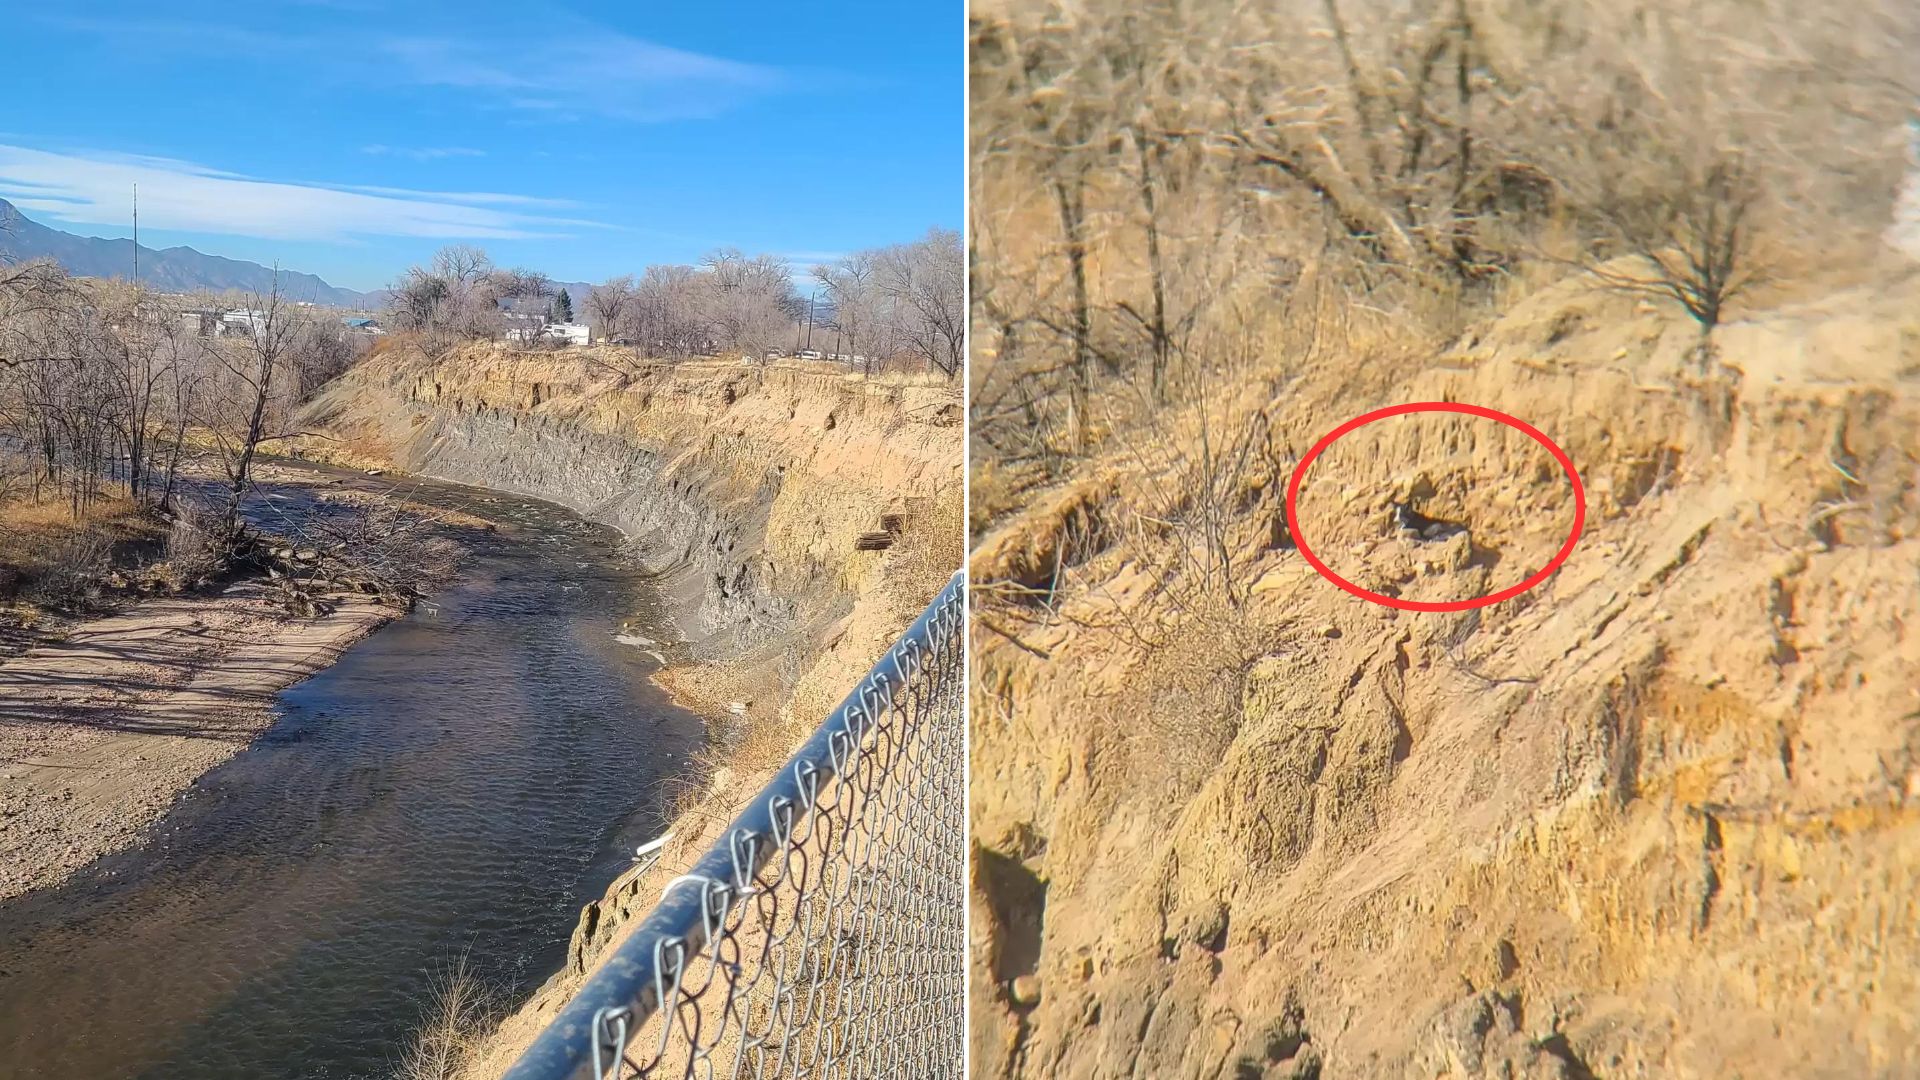 Man Noticed Something Strange At The Edge Of A Cliff So He Decided To Check It Out